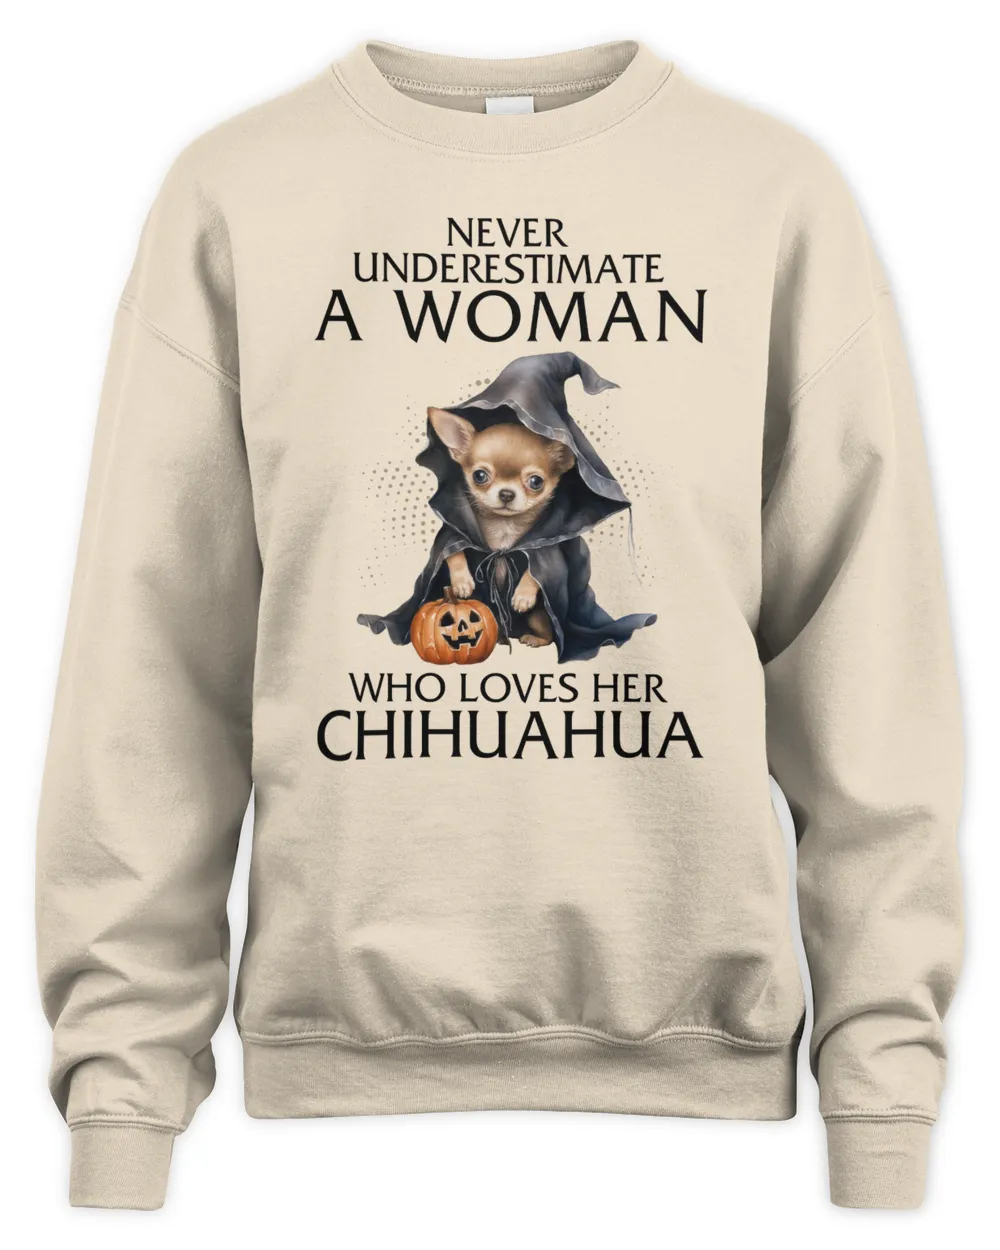 Who Loves Her Chihuahua